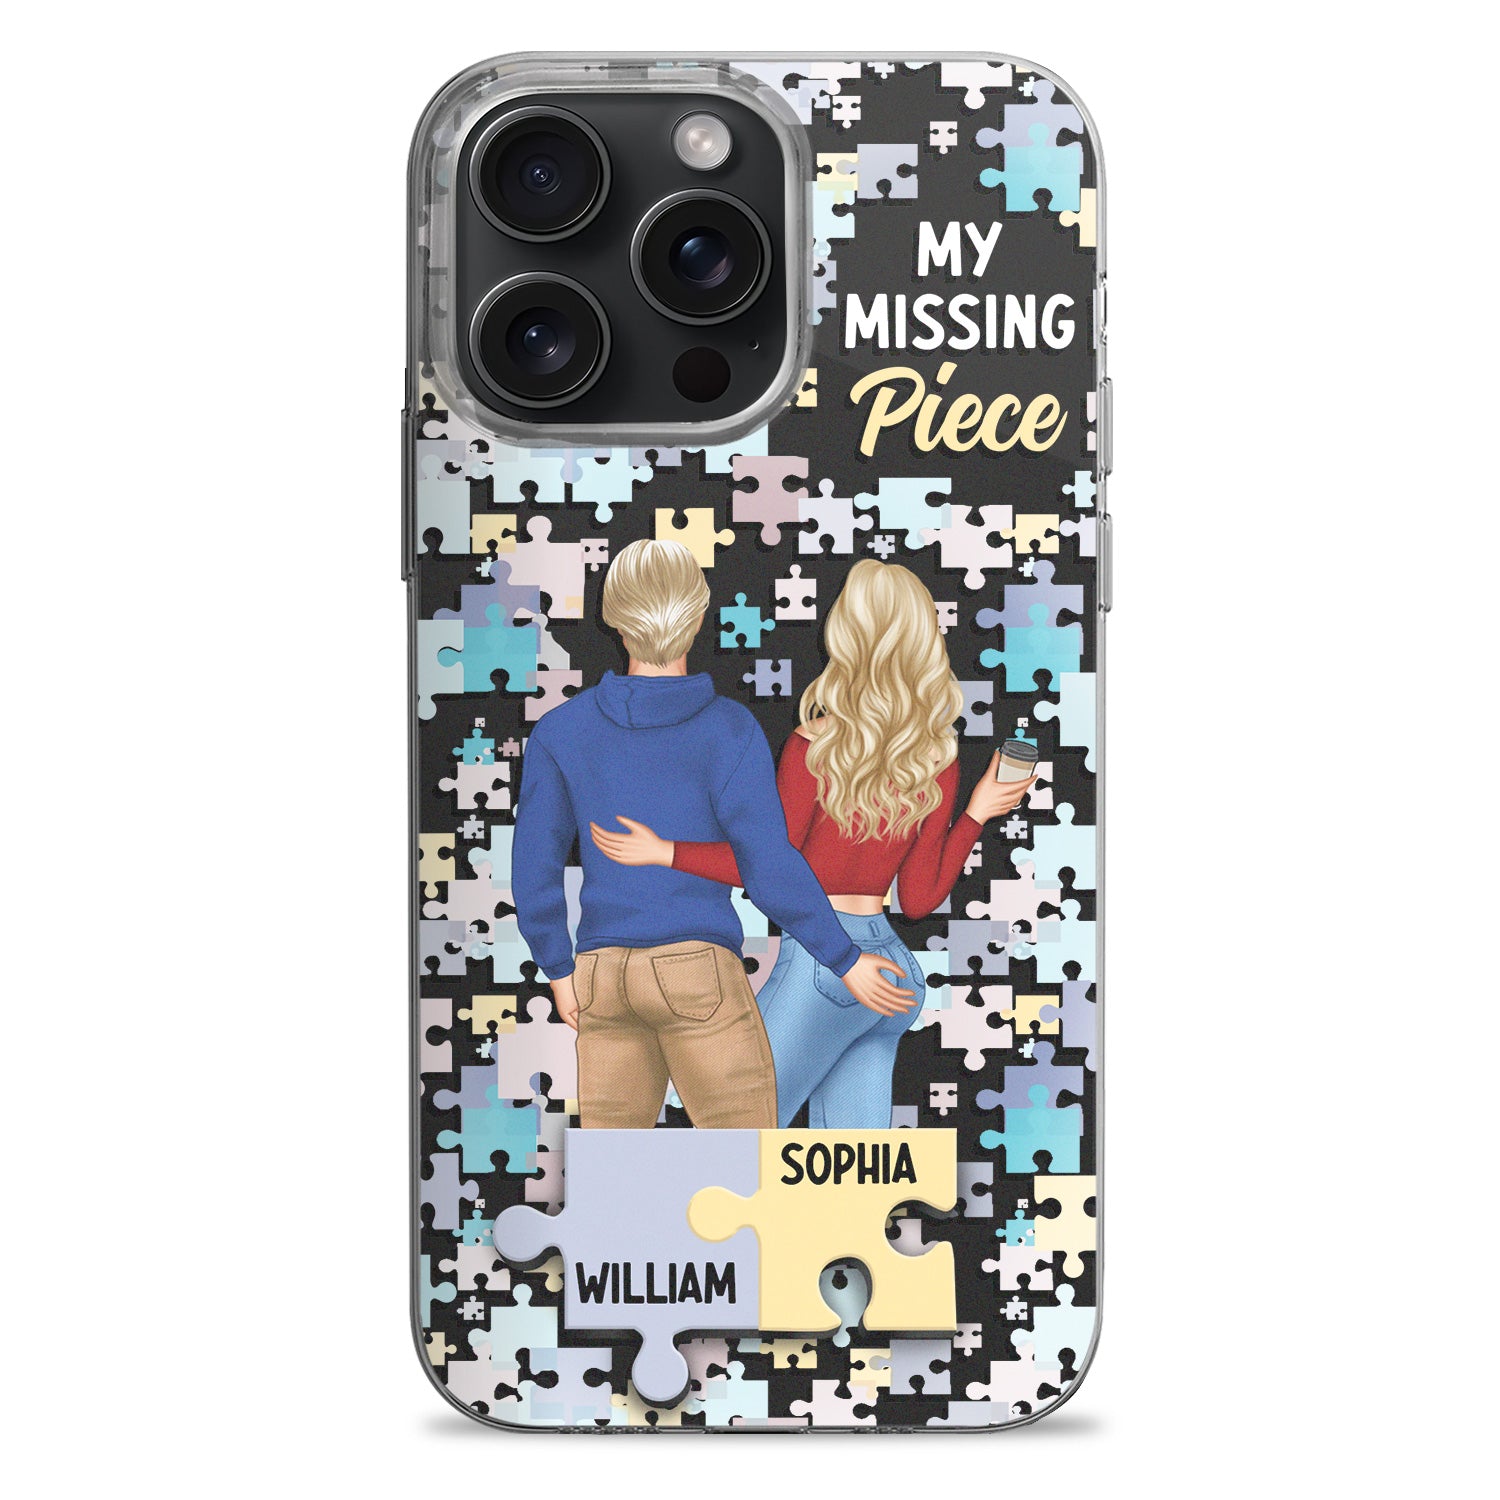 My Missing Piece Couple Back - Loving, Anniversary Gift For Spouse, Husband, Wife - Personalized Clear Phone Case